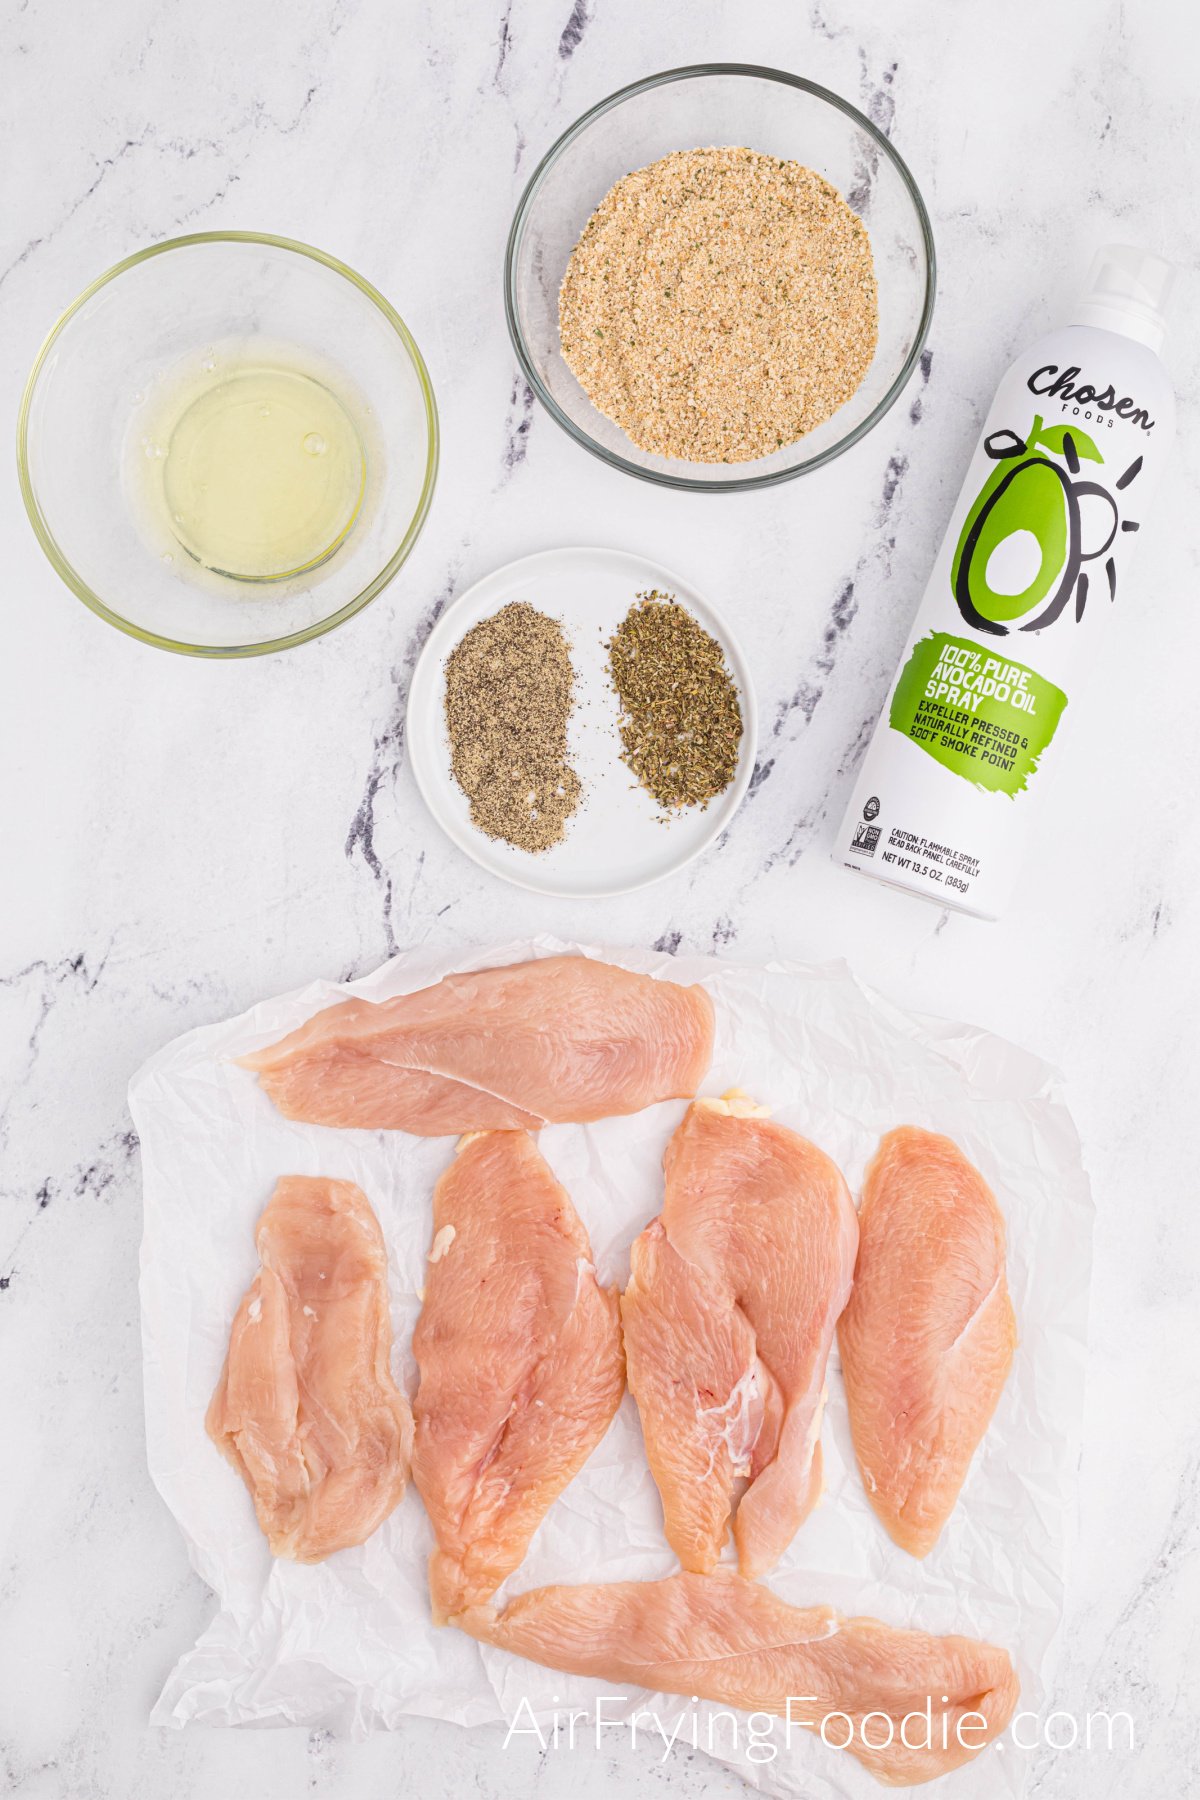 Ingredients picture with six boneless, skinless raw chicken breasts, a round white plate with Italian seasoning, and ground black pepper. Two clear bowls consist of egg whites, and the other contains seasoned breadcrumbs and a bottle of olive oil spray.